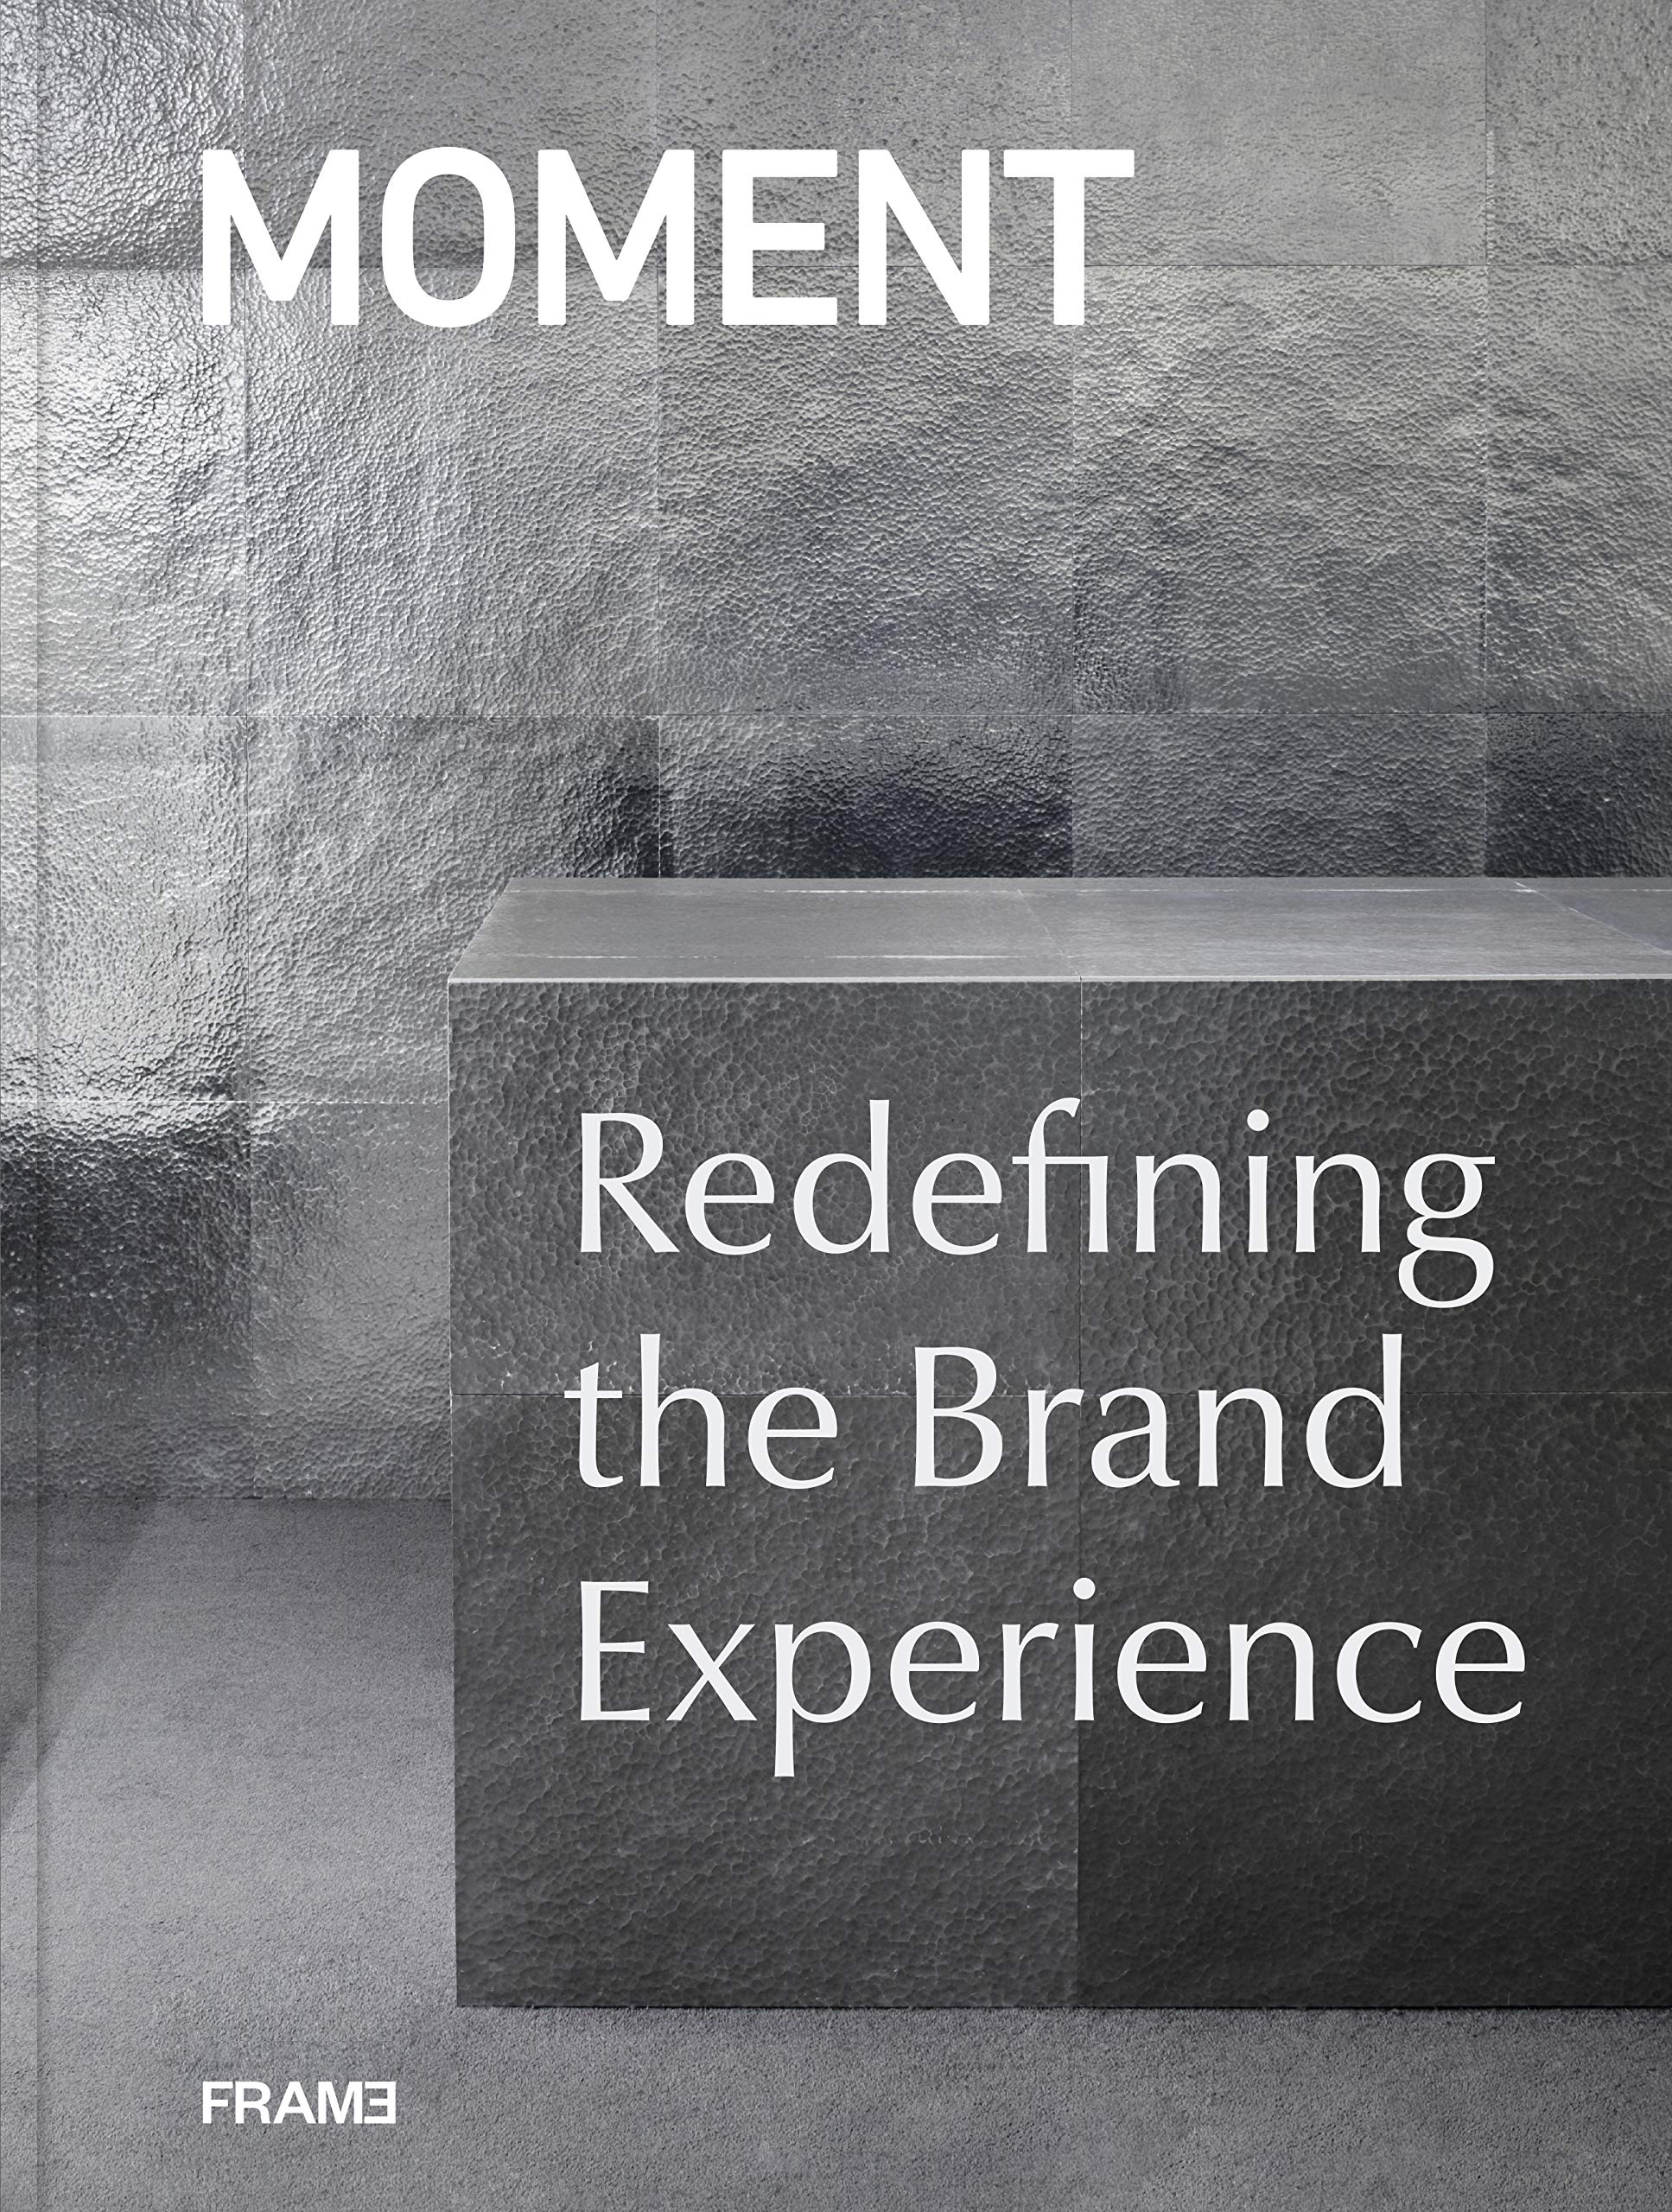 Moment : redefining the brand experience 책표지